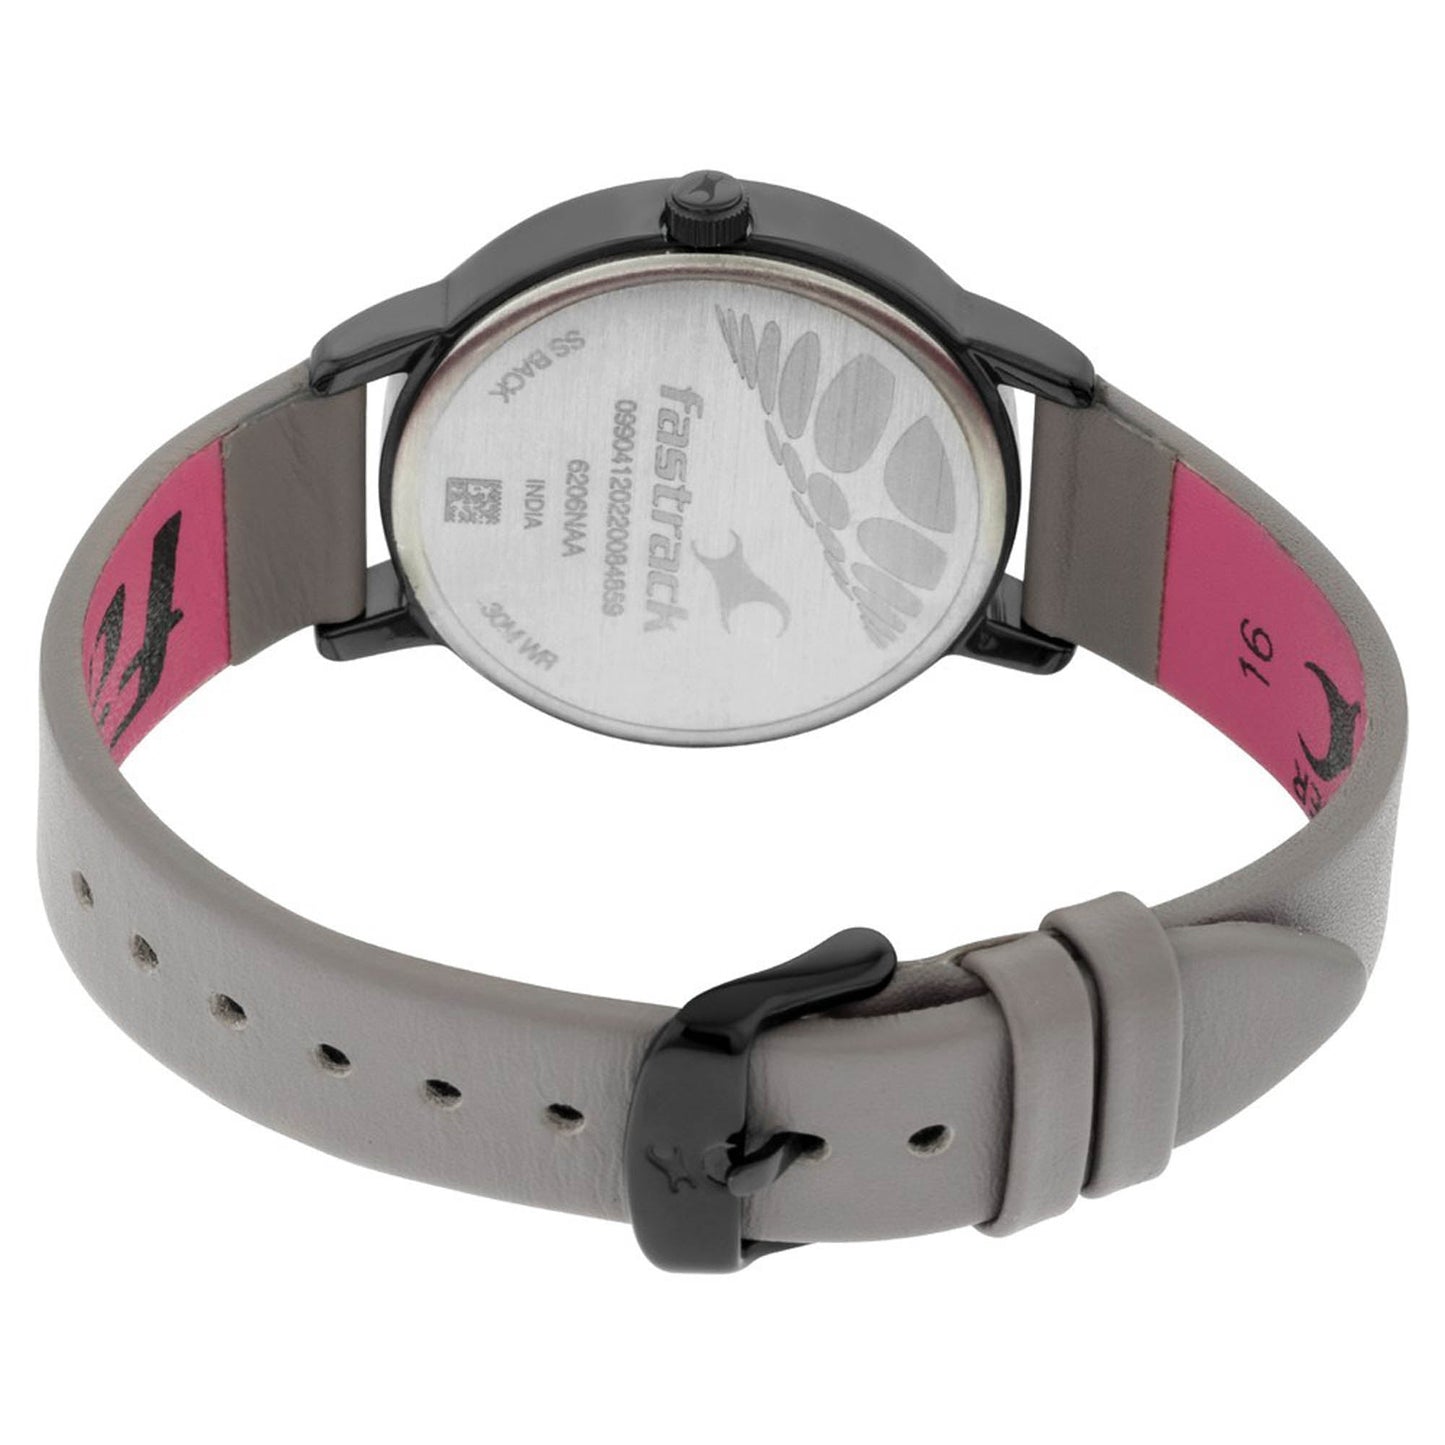 Fastrack Fastrack Ruffles Quartz Analog with Date Grey Dial Leather Strap Watch for Girls